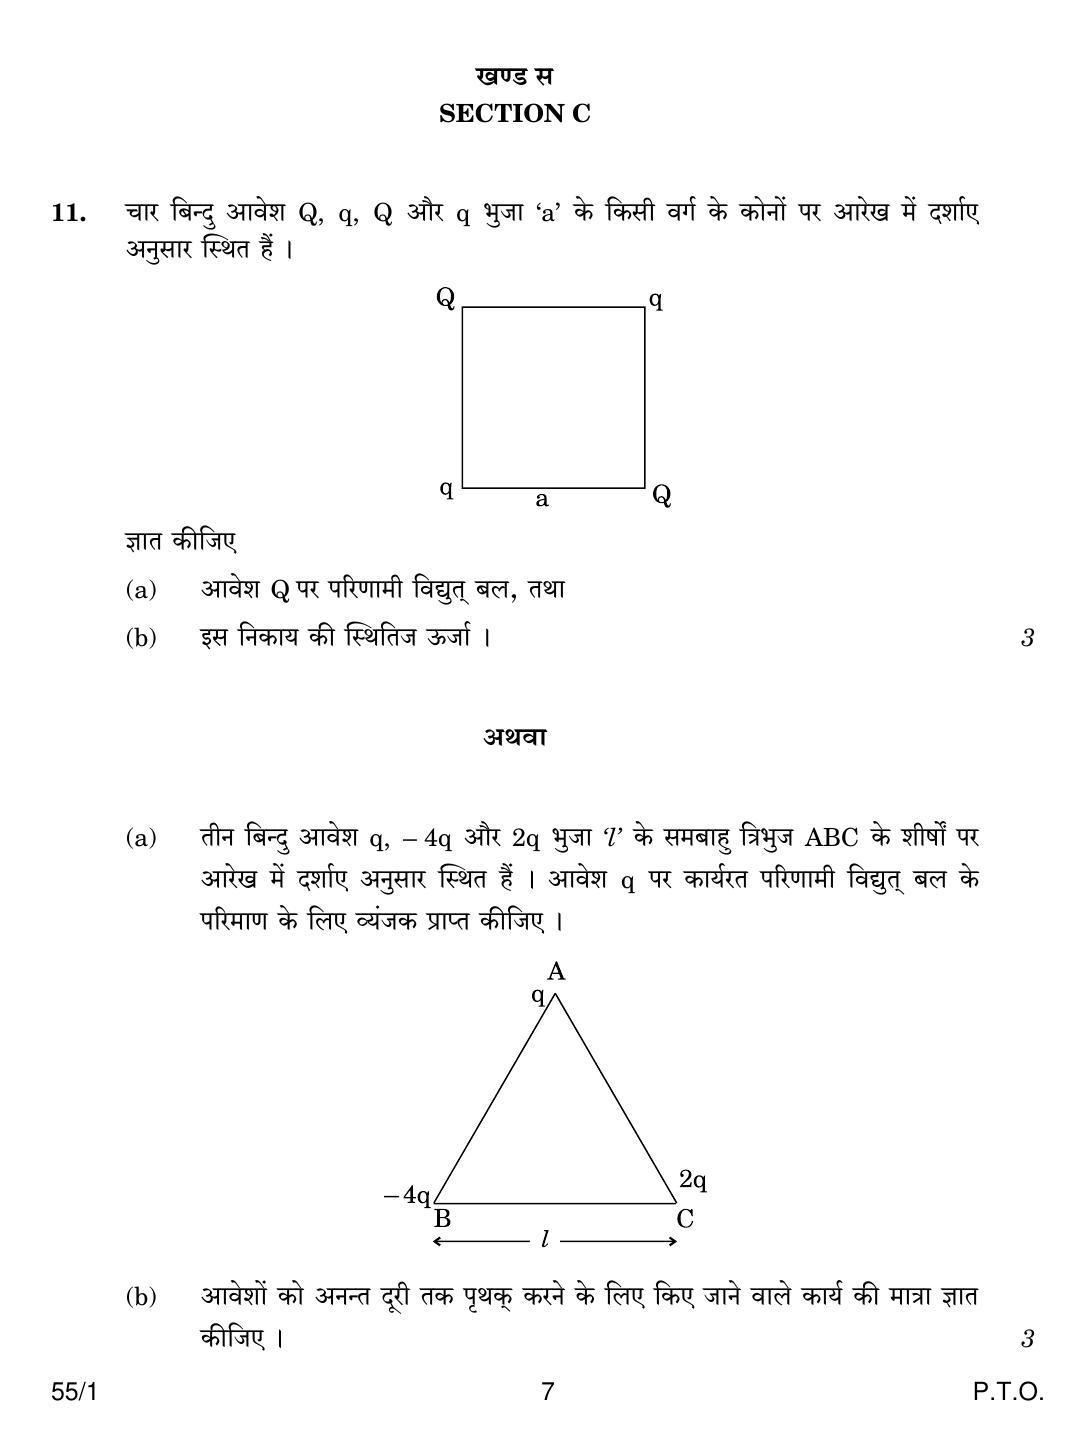 CBSE Class 12 55-1 PHYSICS 2018 Question Paper - Page 7